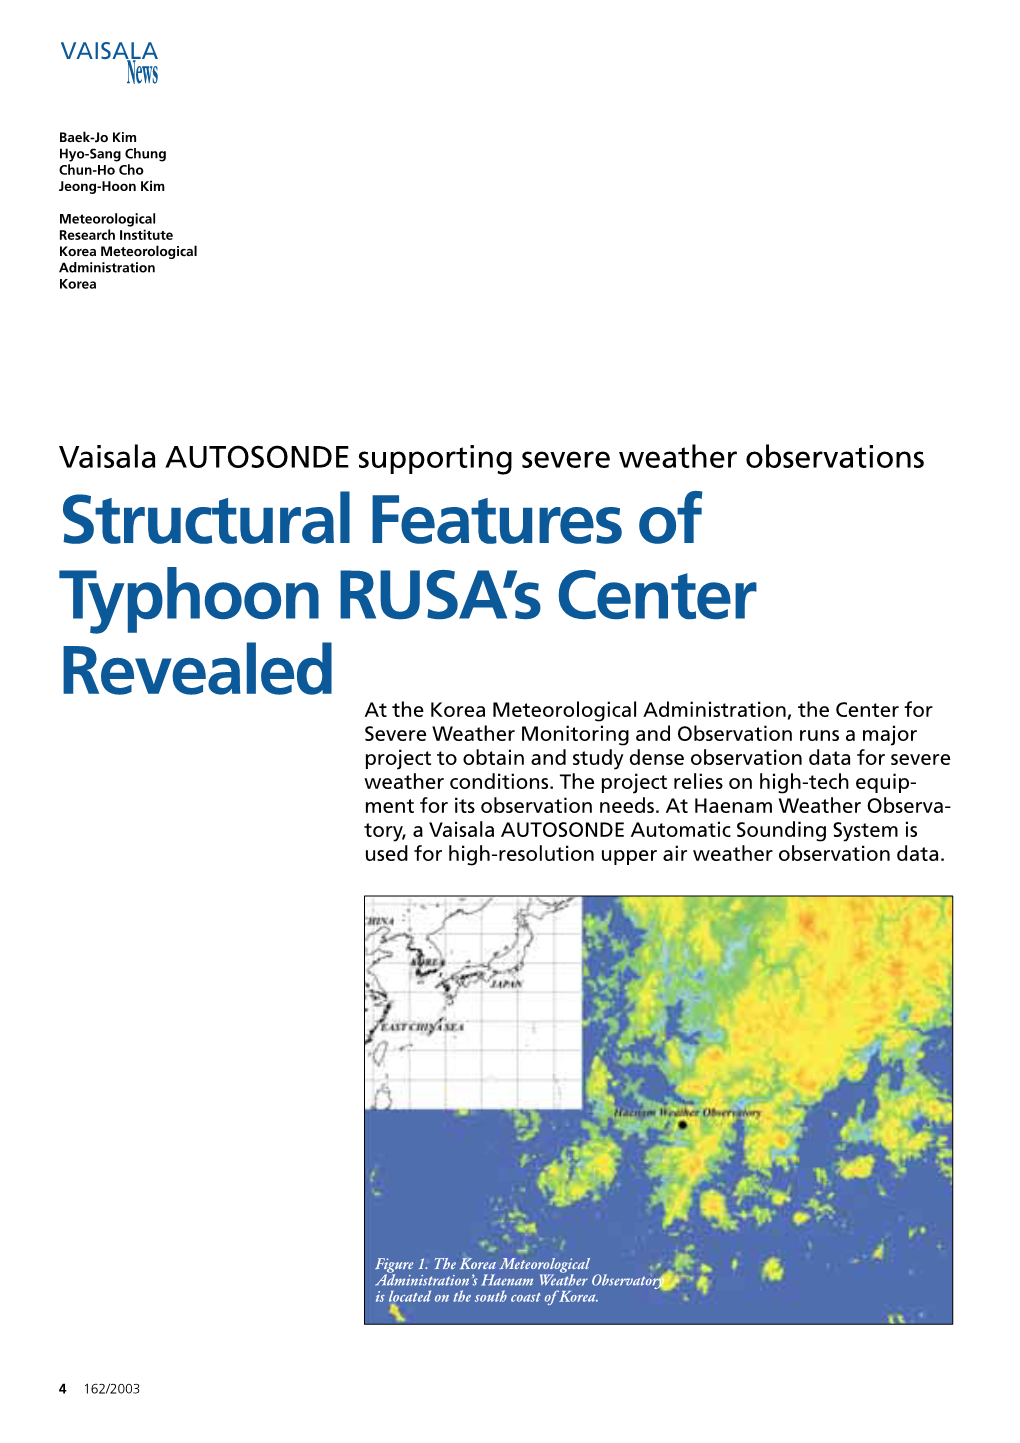 Structural Features of Typhoon RUSA's Center Revealed